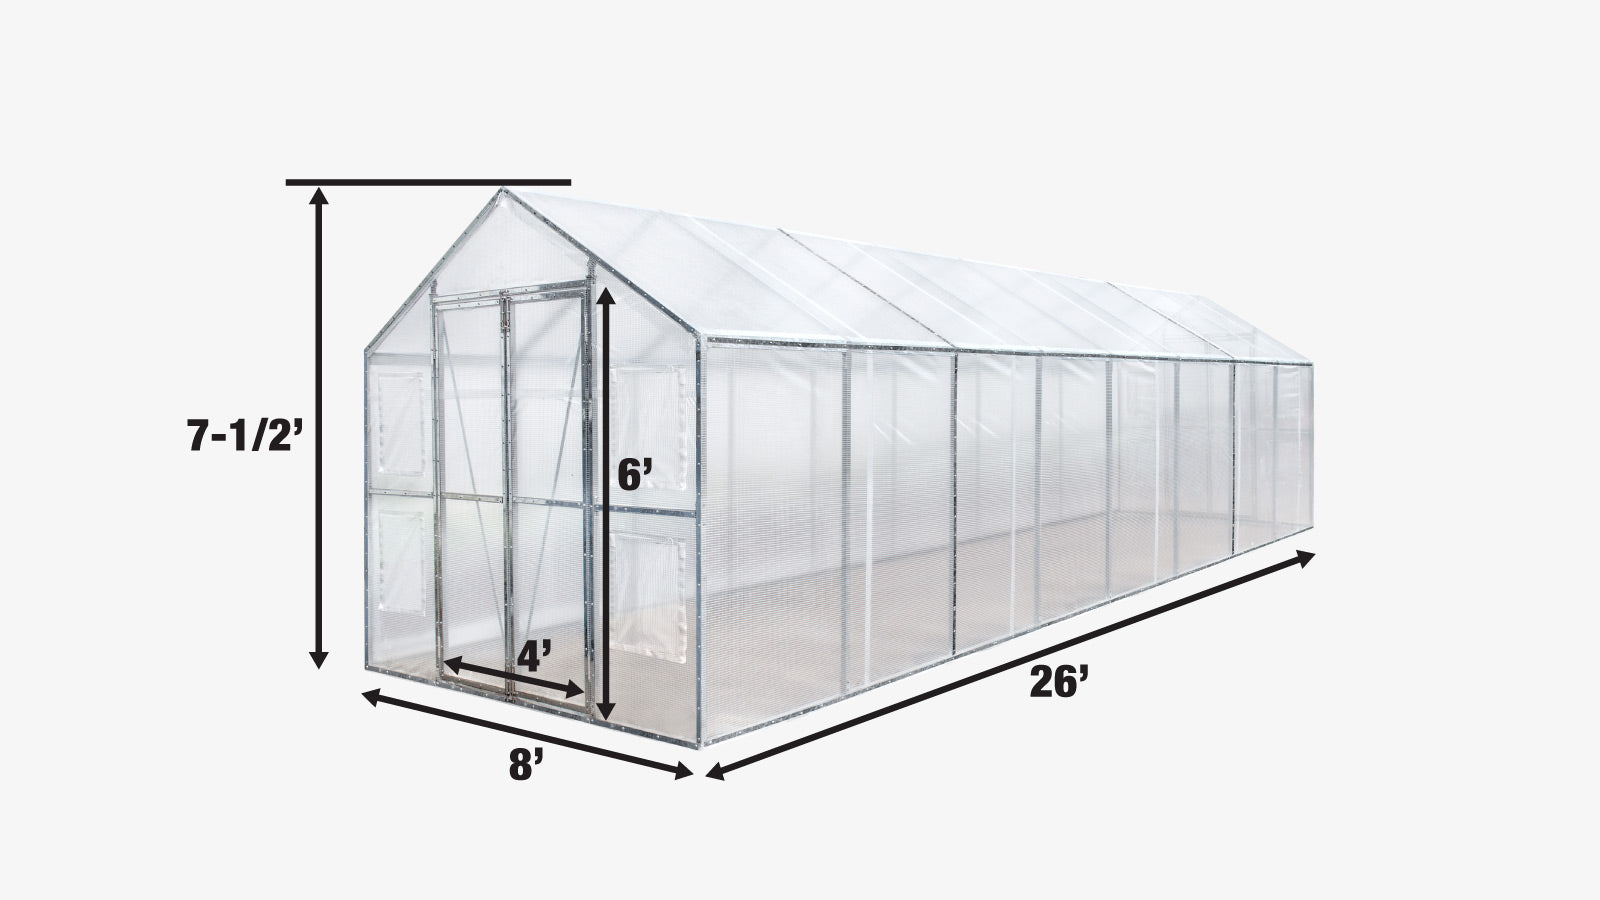 TMG Industrial 8’ x 26’ Greenhouse Grow Tent w/20 Mil Ripstop Leno Mesh PVC Cover, Galvanized Steel Frame, Roll-up Windows, TMG-GH826-specifications-image